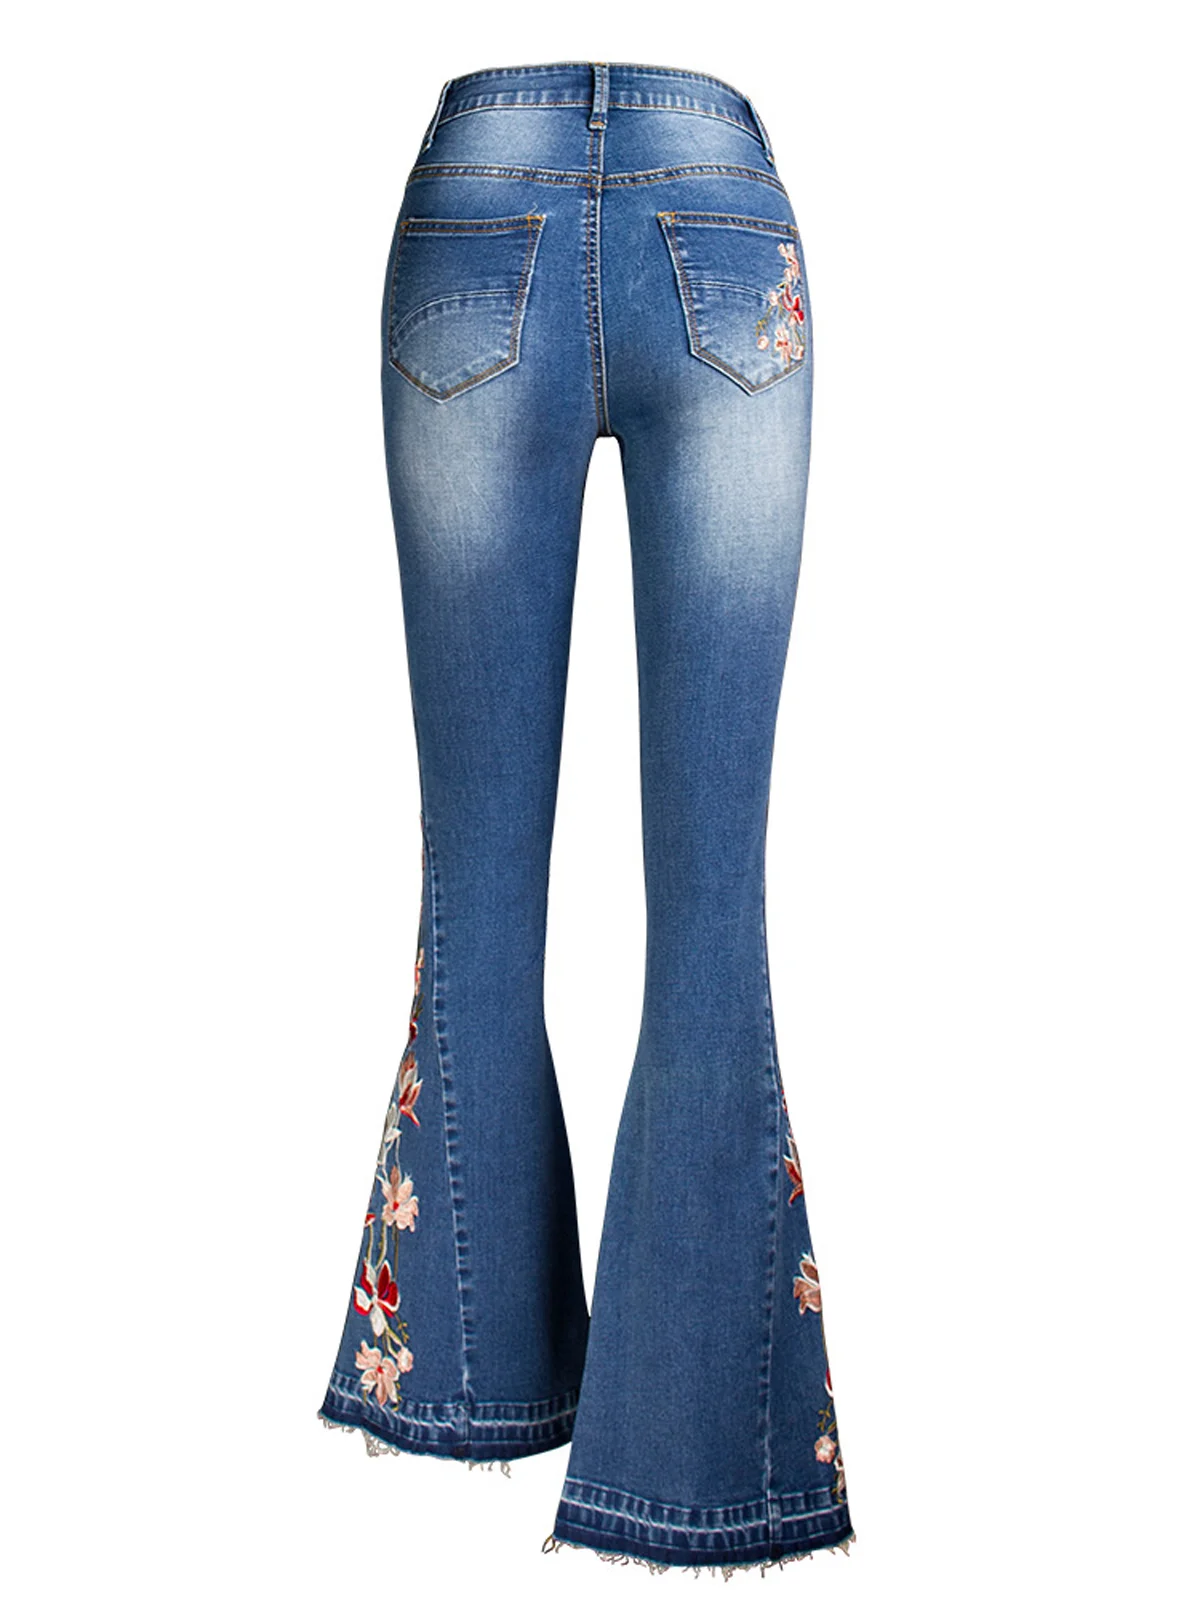 Casual Embroidery Denim Jeans